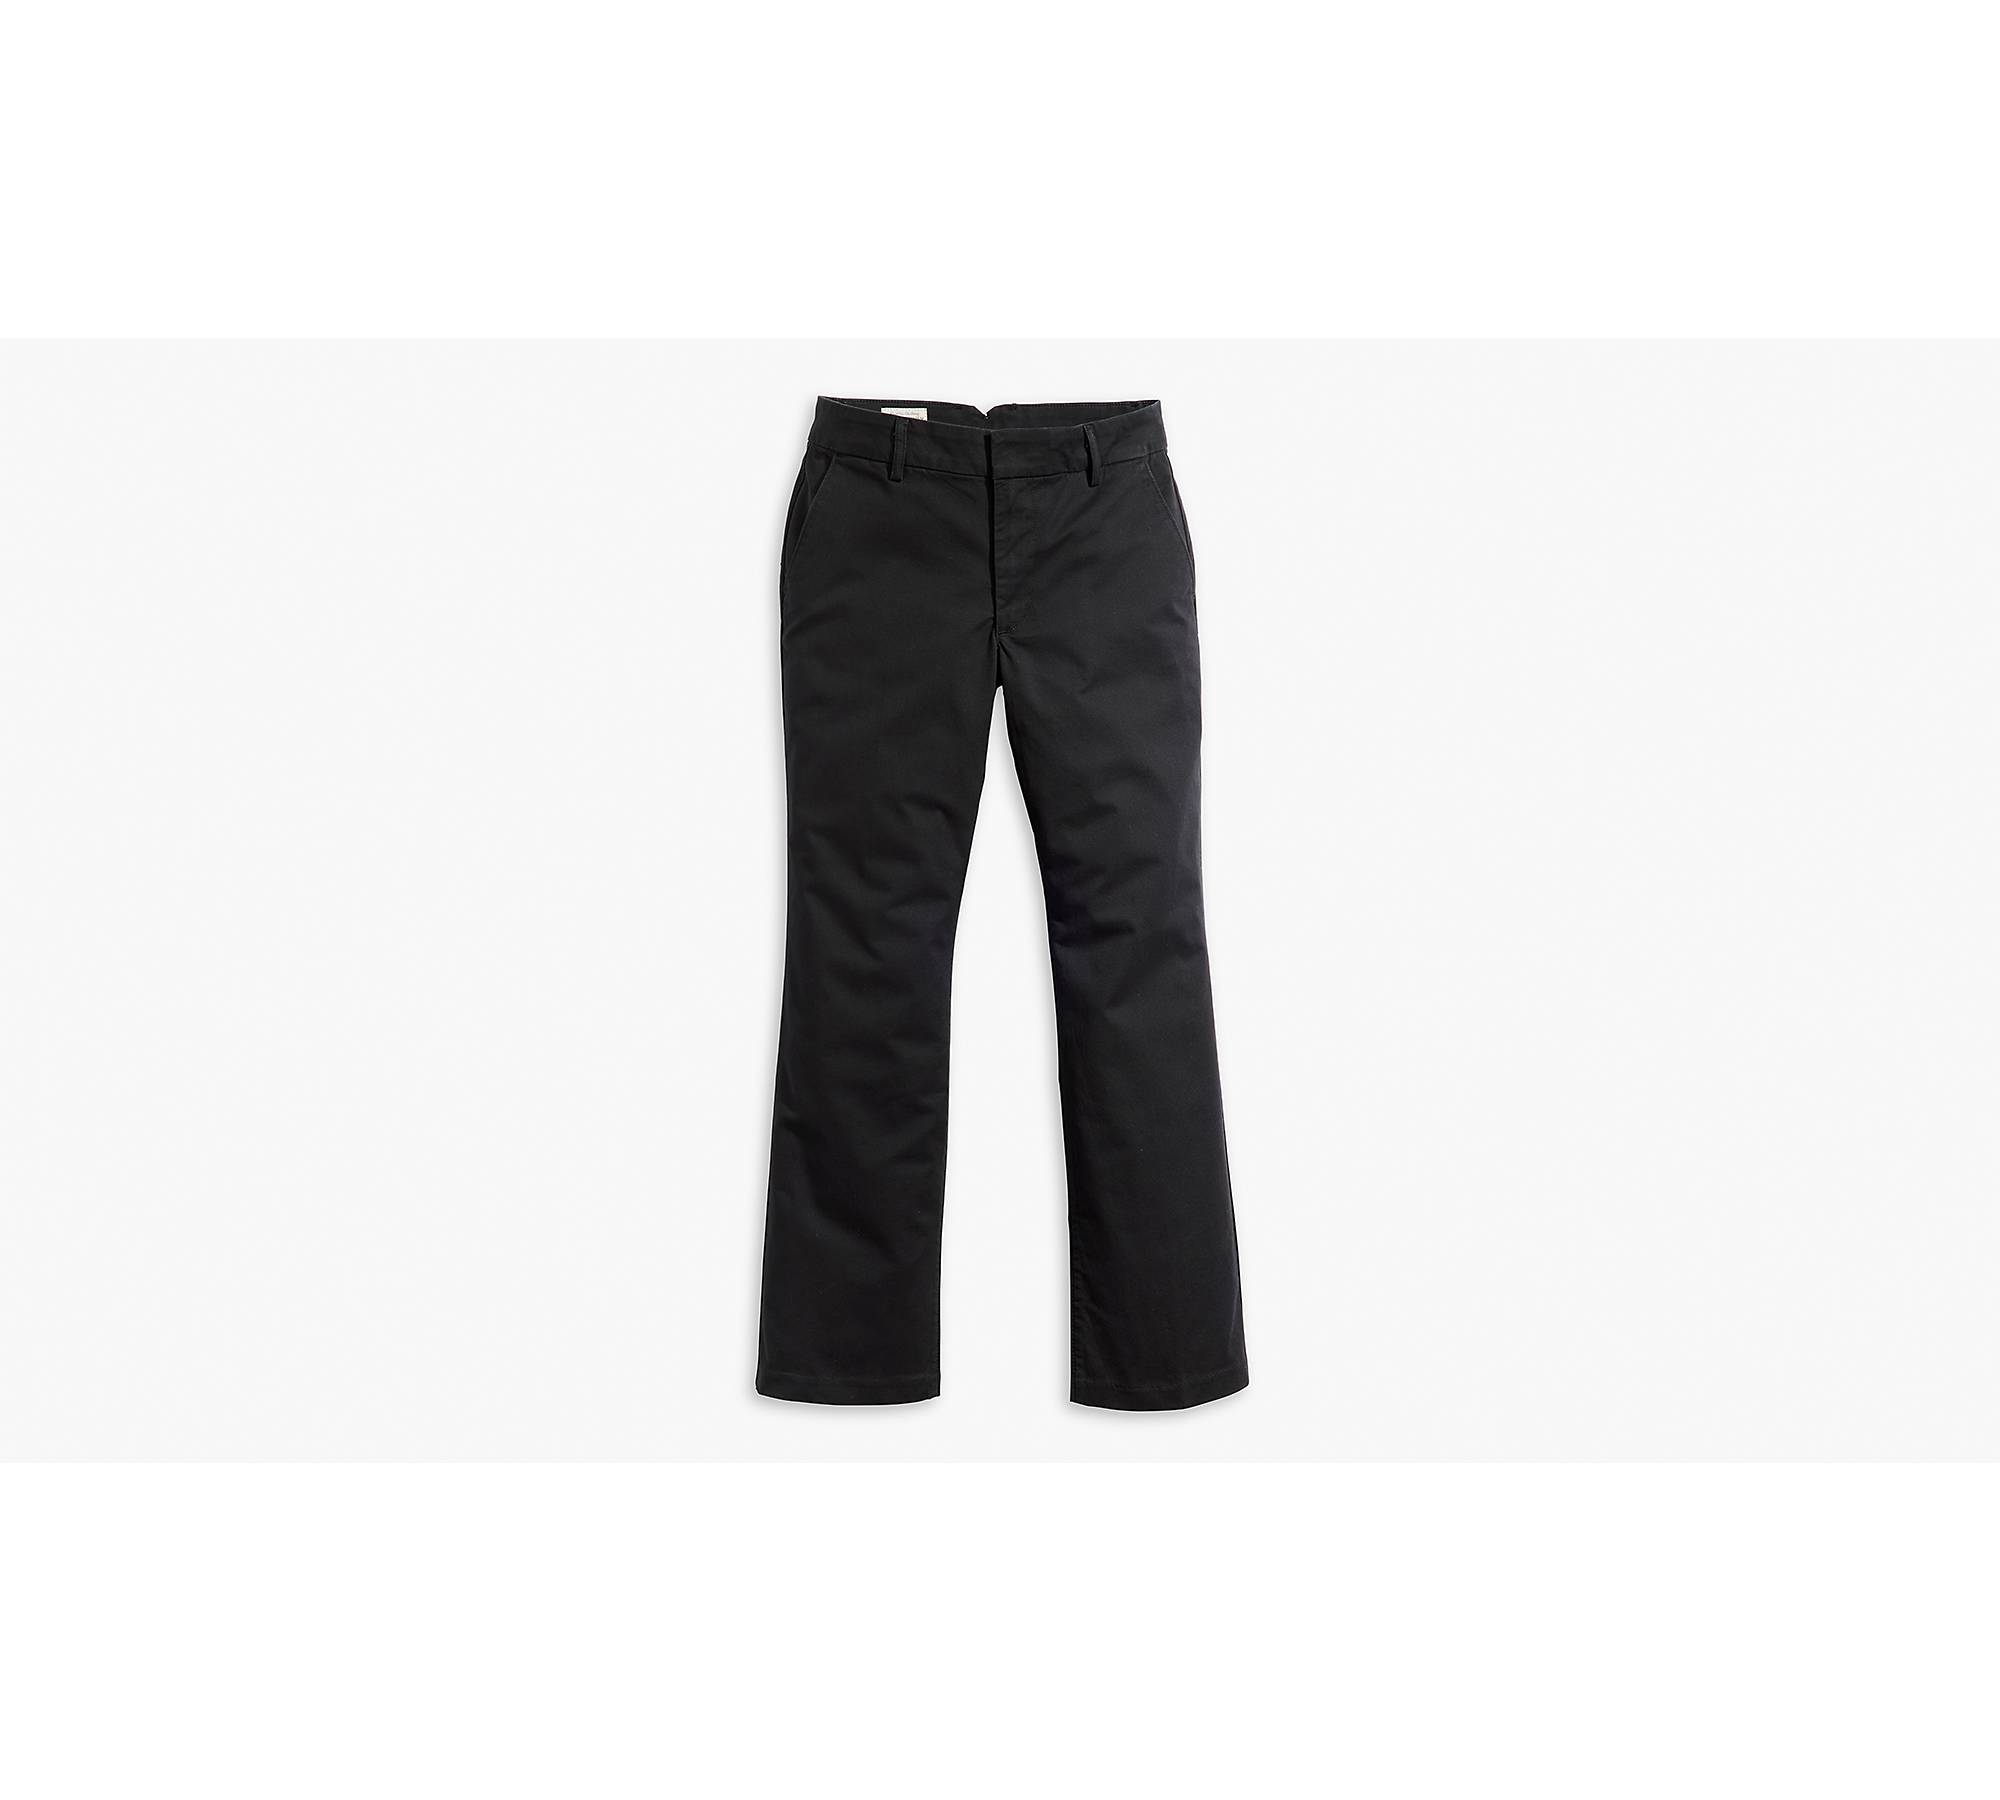 Dickies Womens Twill Bootcut Pant Midrise, Rinsed Black - FPW515